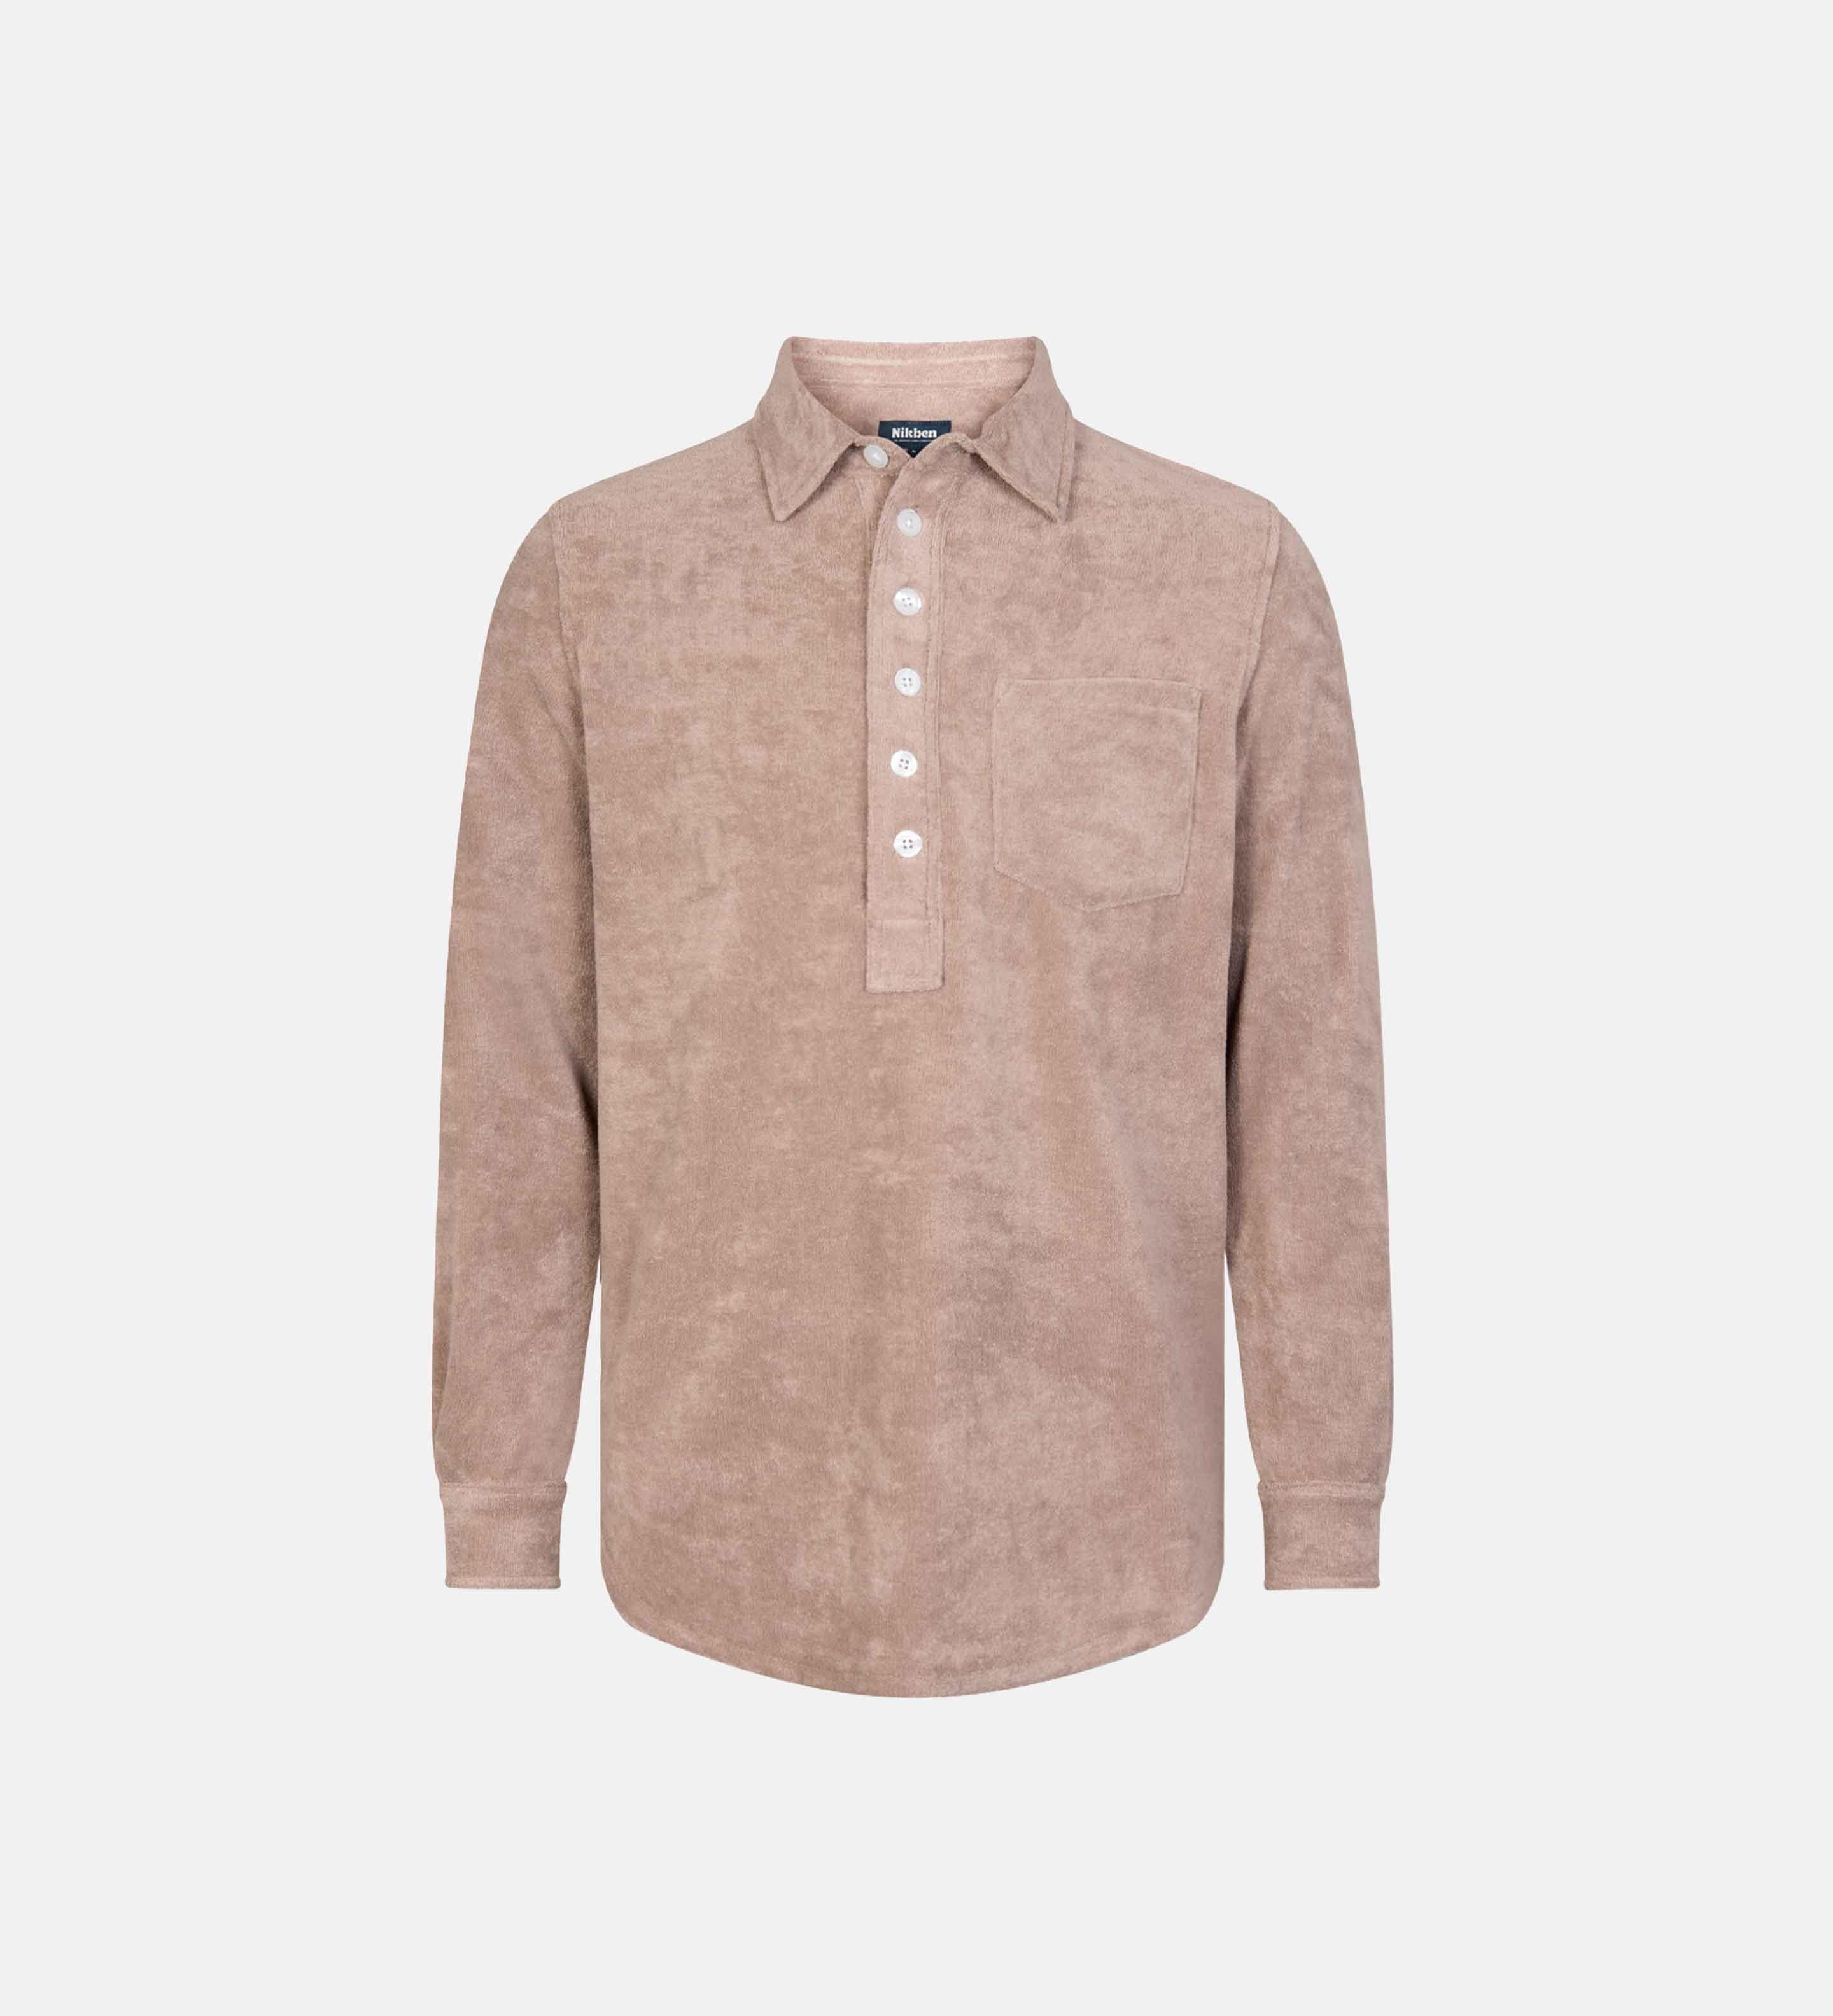 Light brown long sleeve shirt in terry toweling fabric with half button closure and one chest pocket